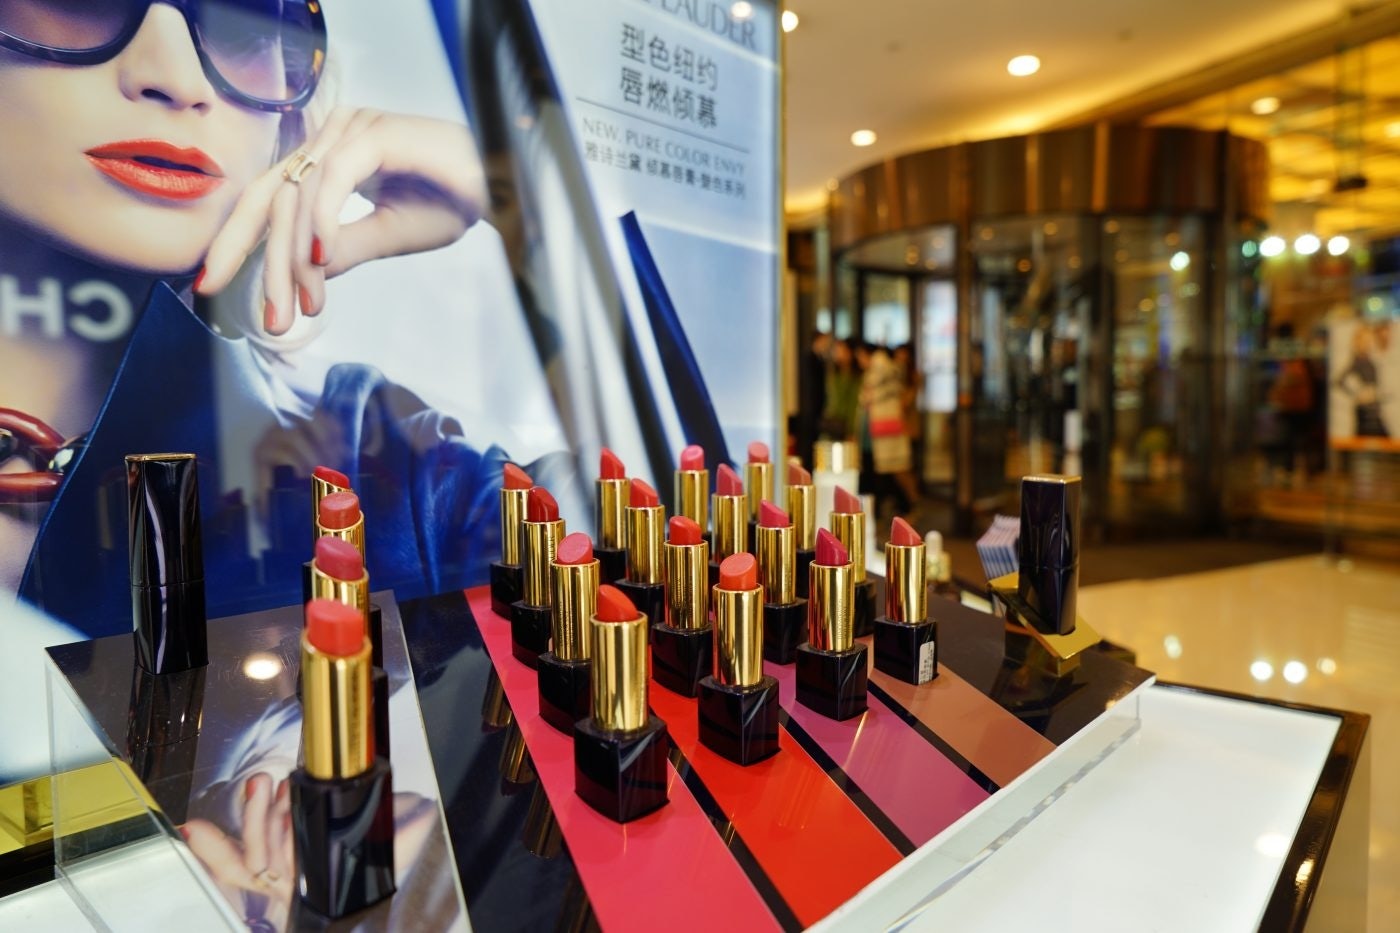 Digital intelligence firm L2 expects China to be the biggest beauty market in the world by 2020. (Shutterstock) 